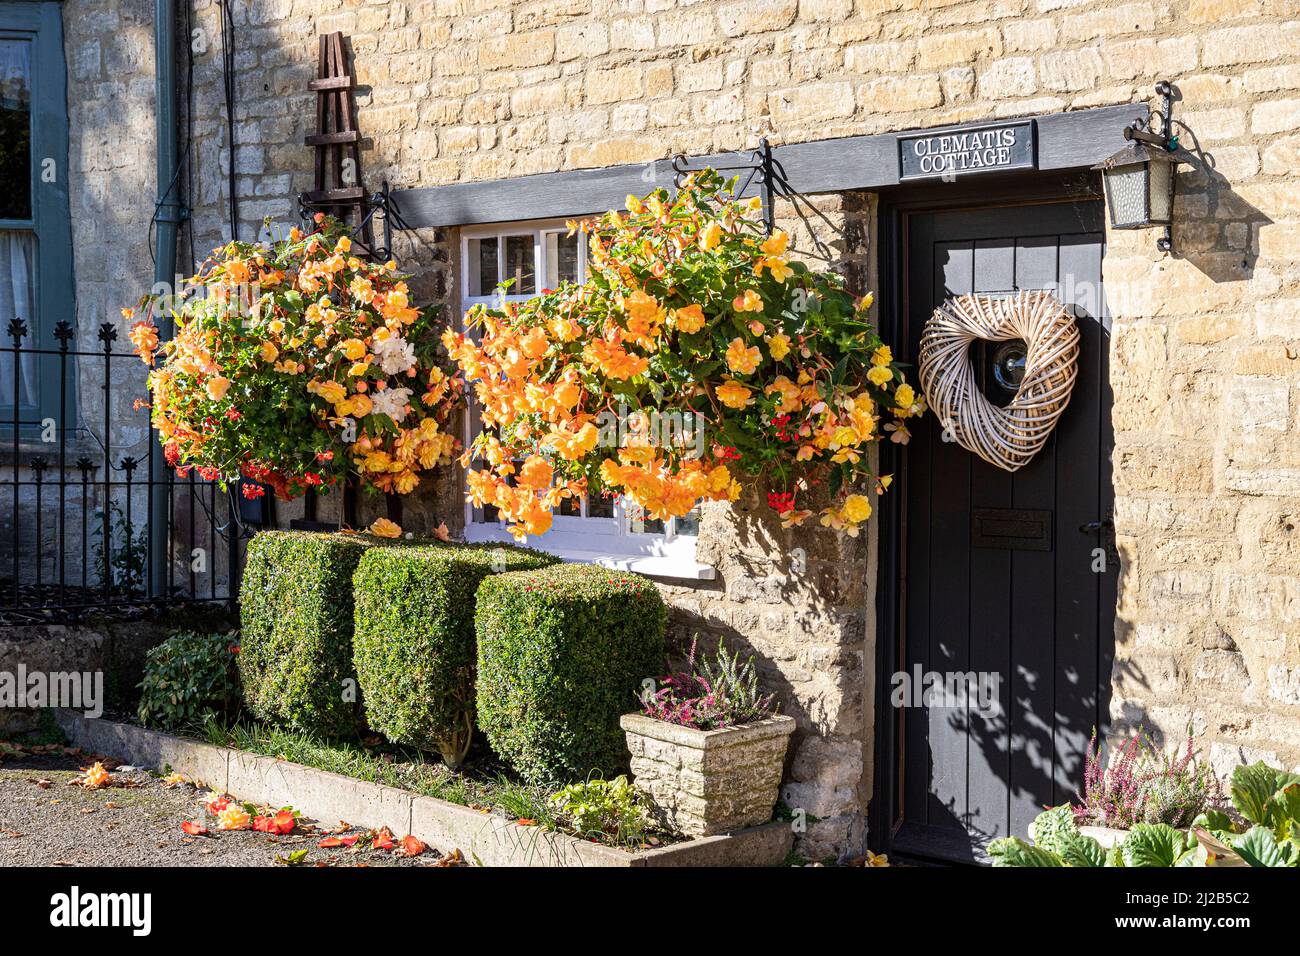 Begonias flowering in hanging baskets outside Clematis Cottage in the Cotswold town of Burford, Oxfordshire, England UK Stock Photo